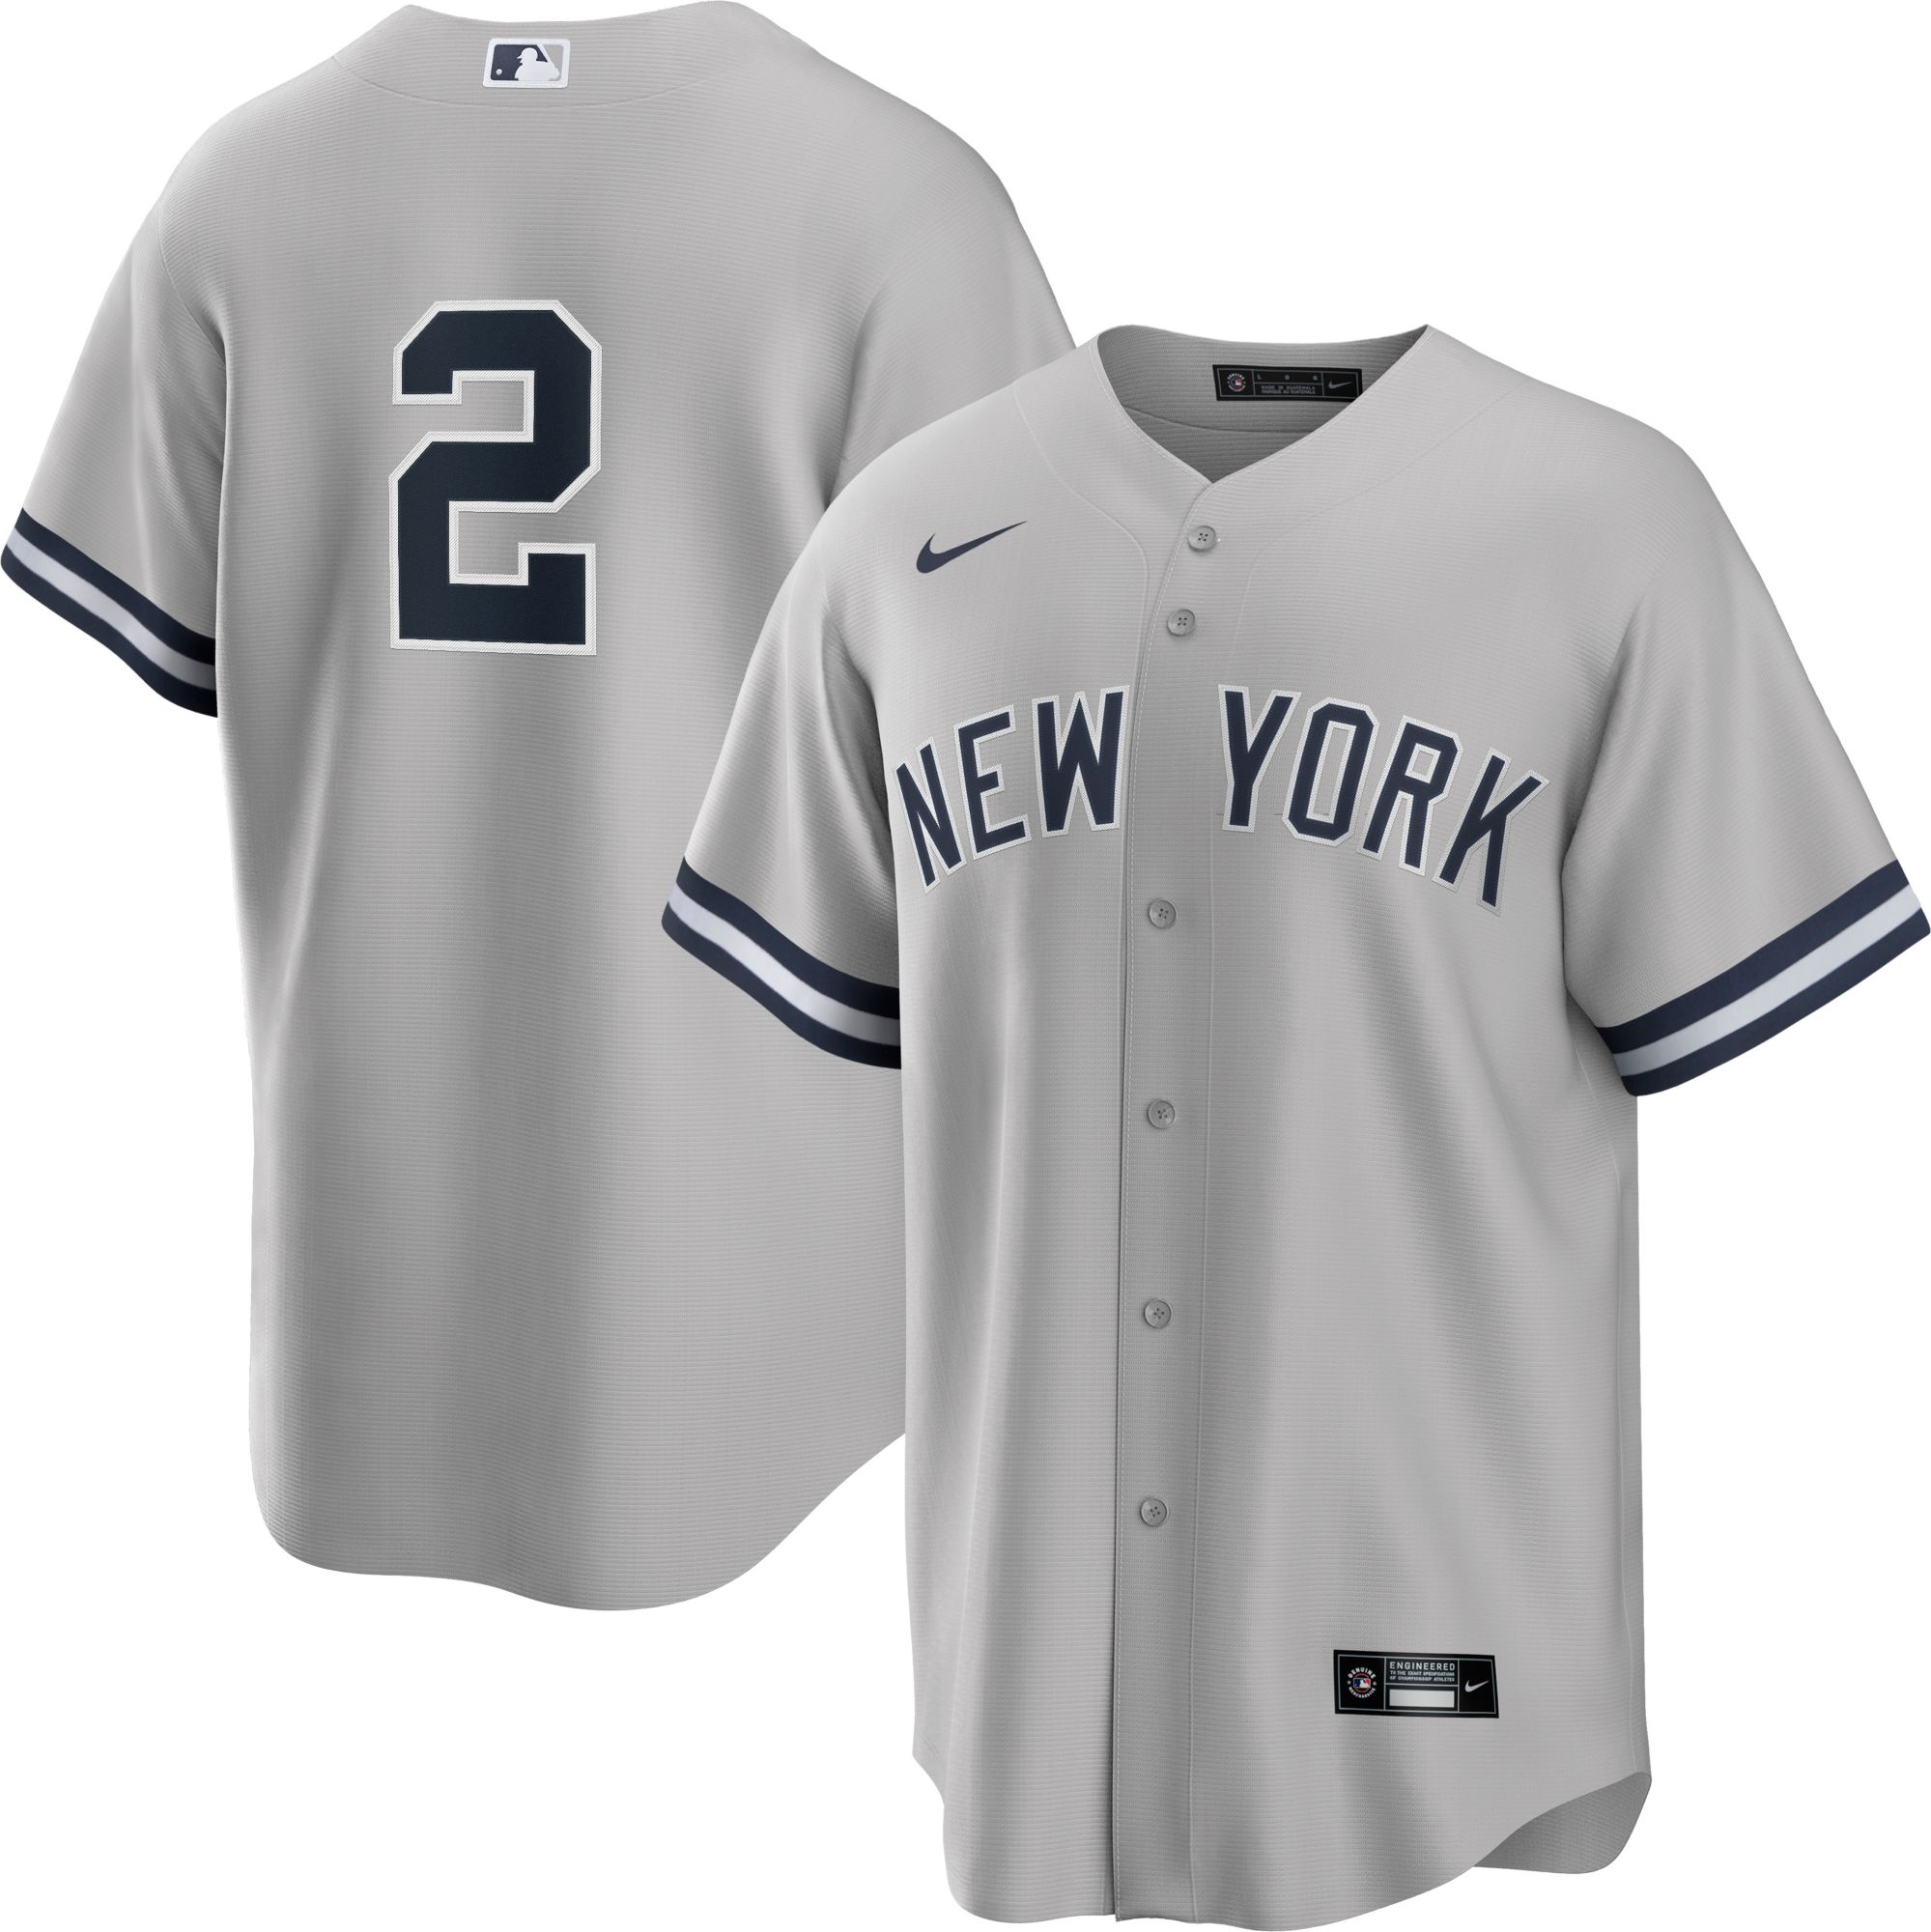 Aaron Judge Jersey #99 Mens Pinstripe Large and Extra Large NWT